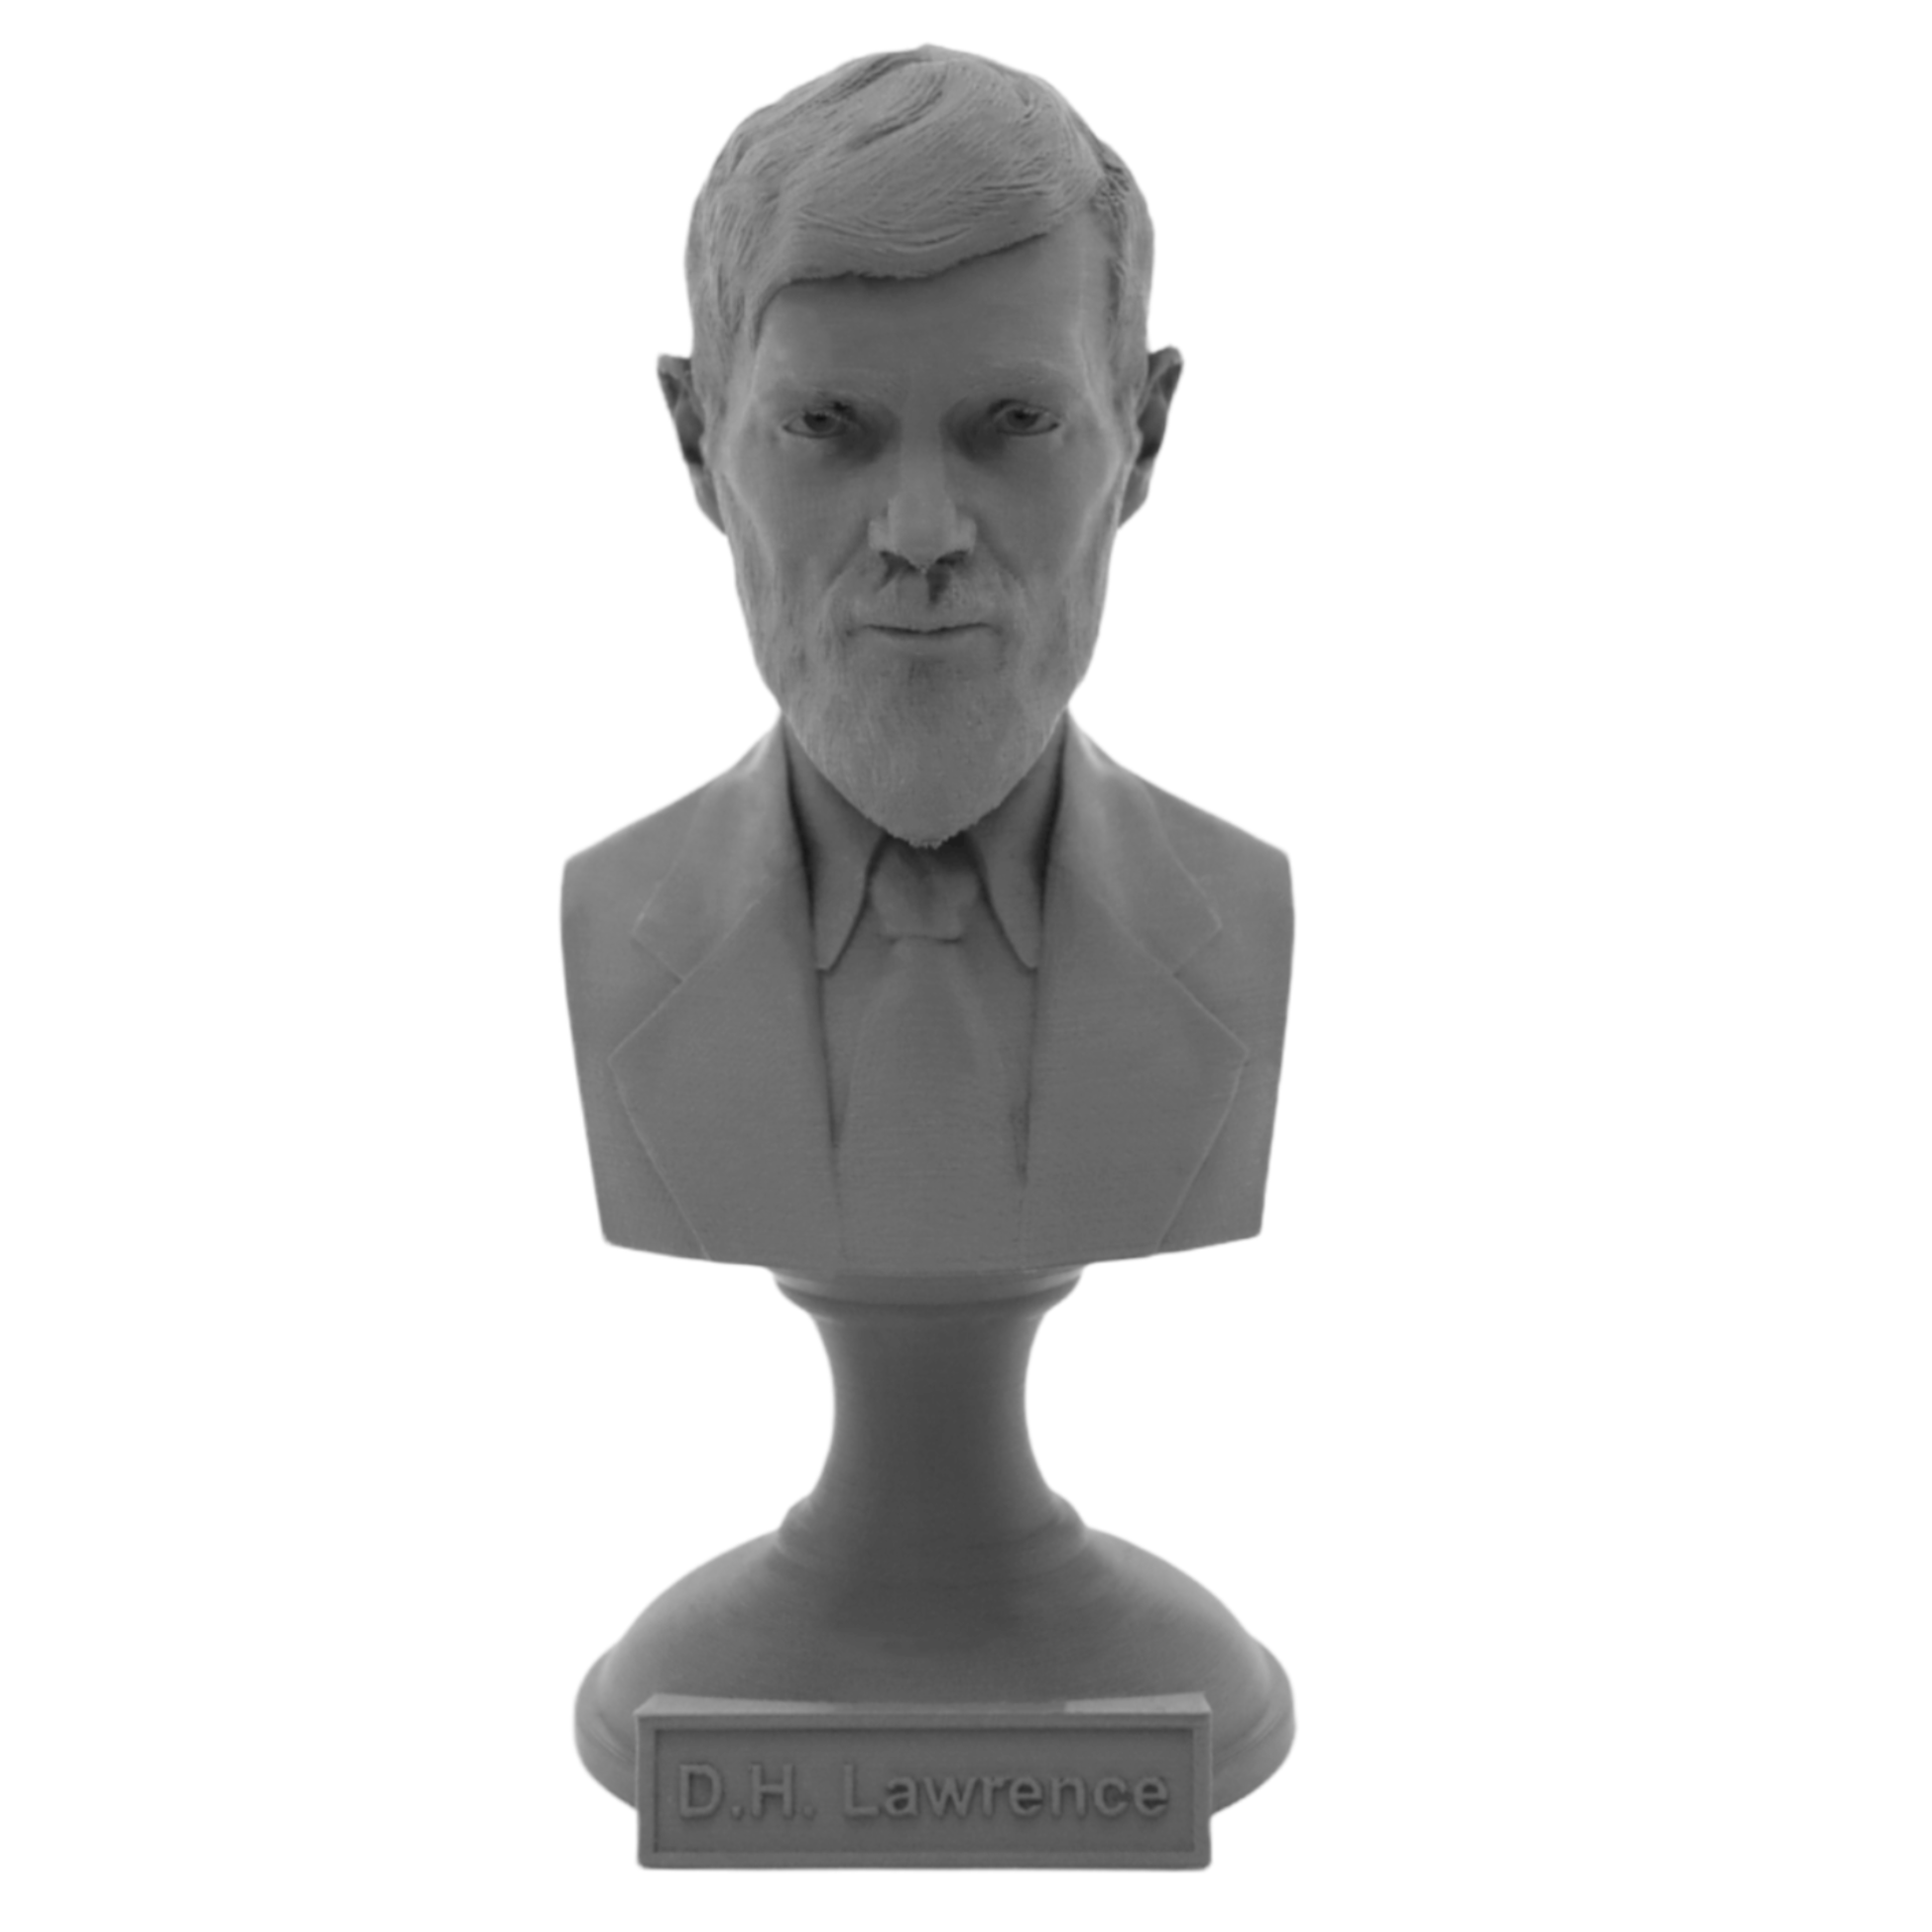 D.H. Lawrence English Writer and Philosopher Sculpture Bust on Pedestal